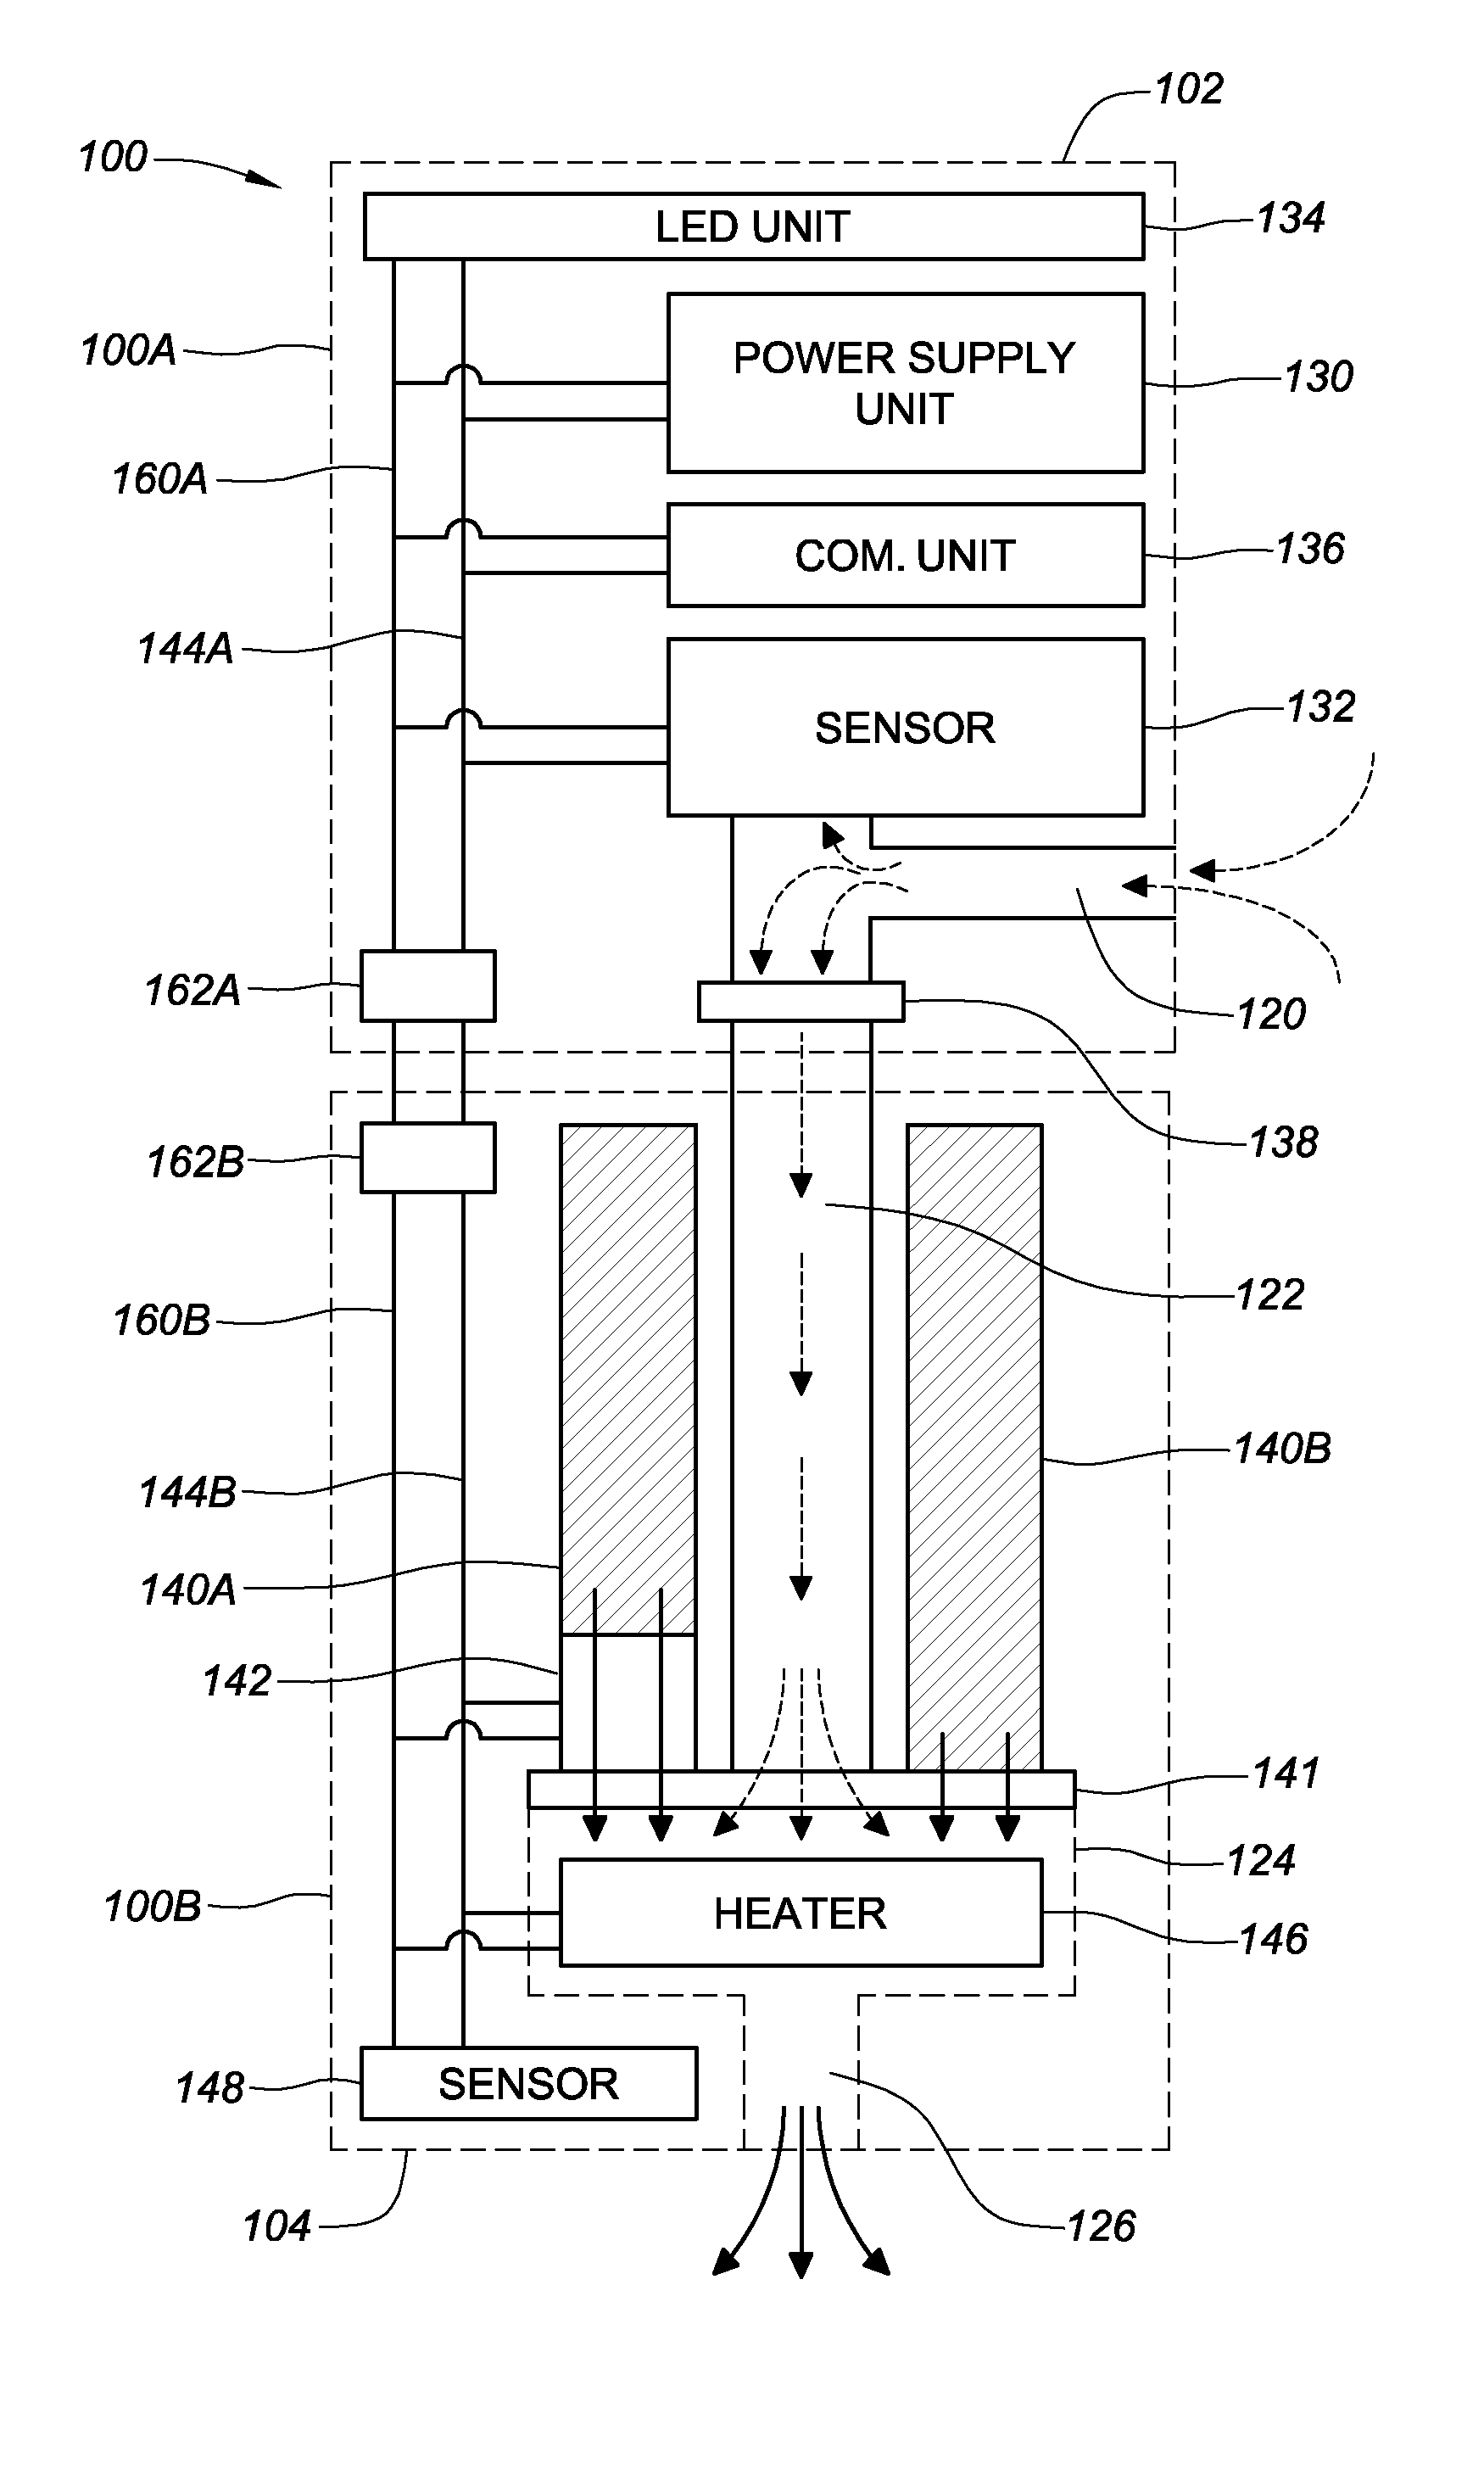 Electronic smoking device and data exchange applications